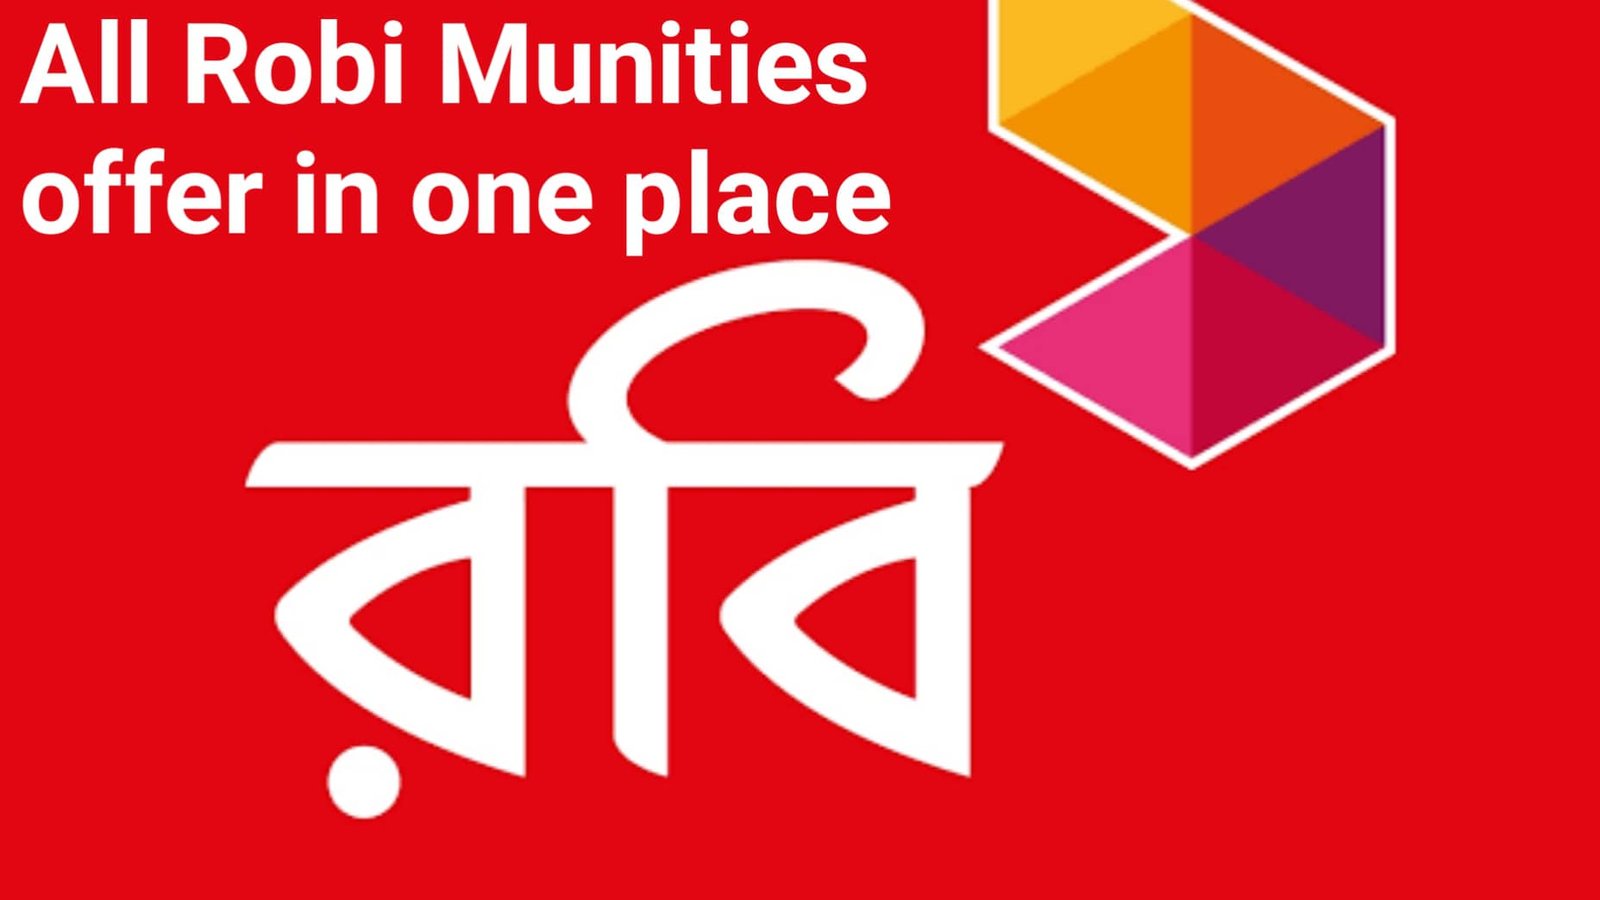 All Robi Munities offer in one Palace